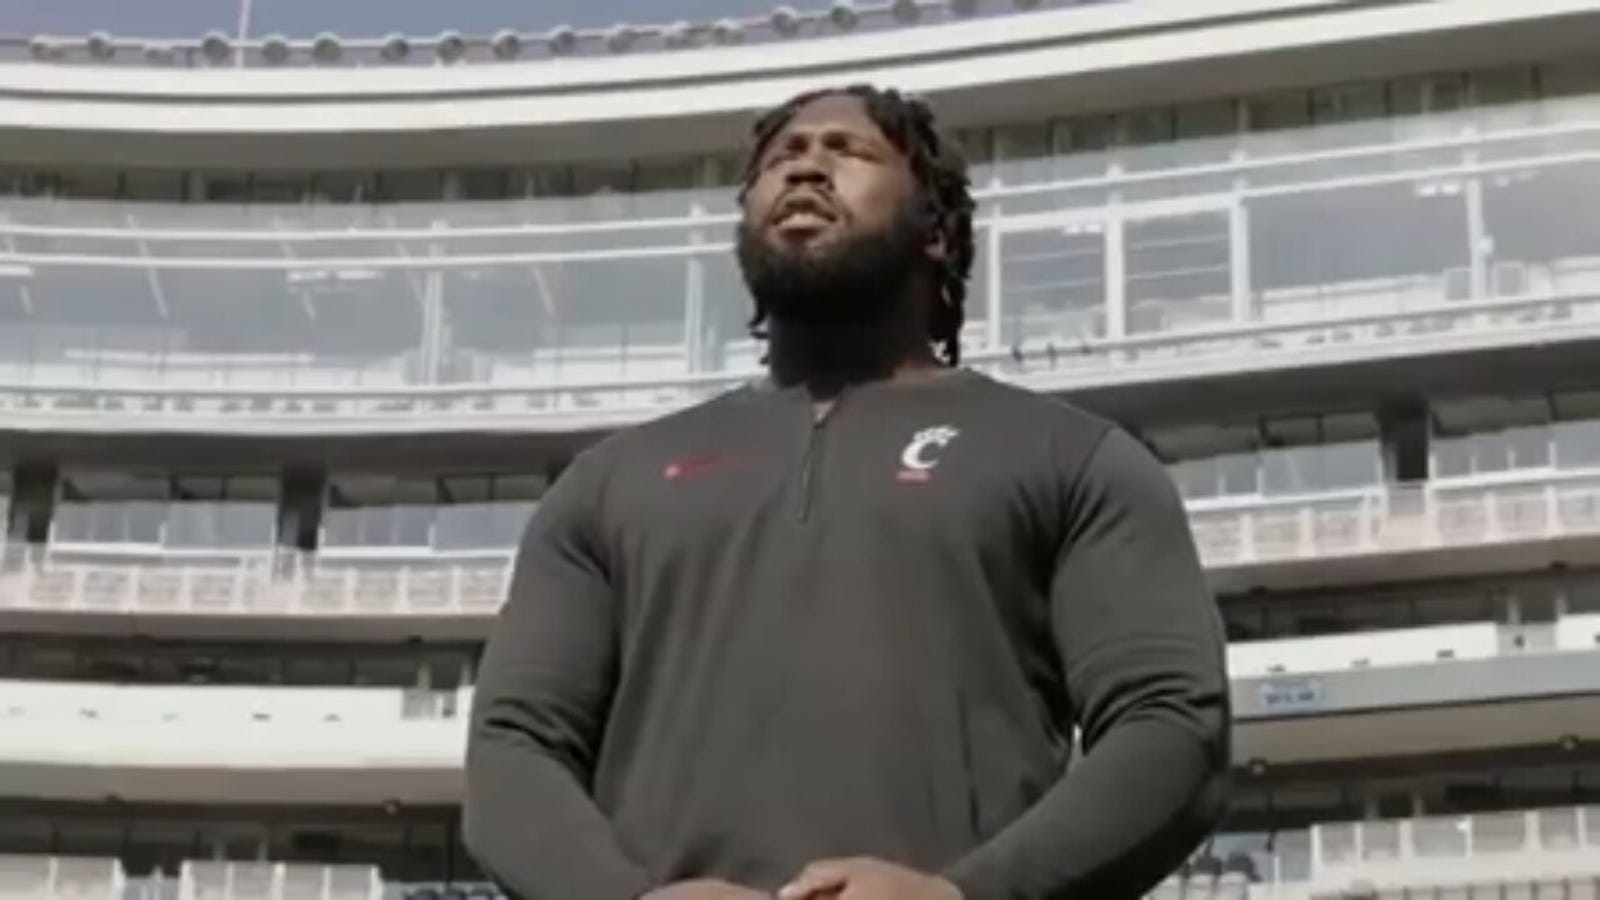 Cincinnati's Jowon Briggs shows his passion off the field | CFB on FOX